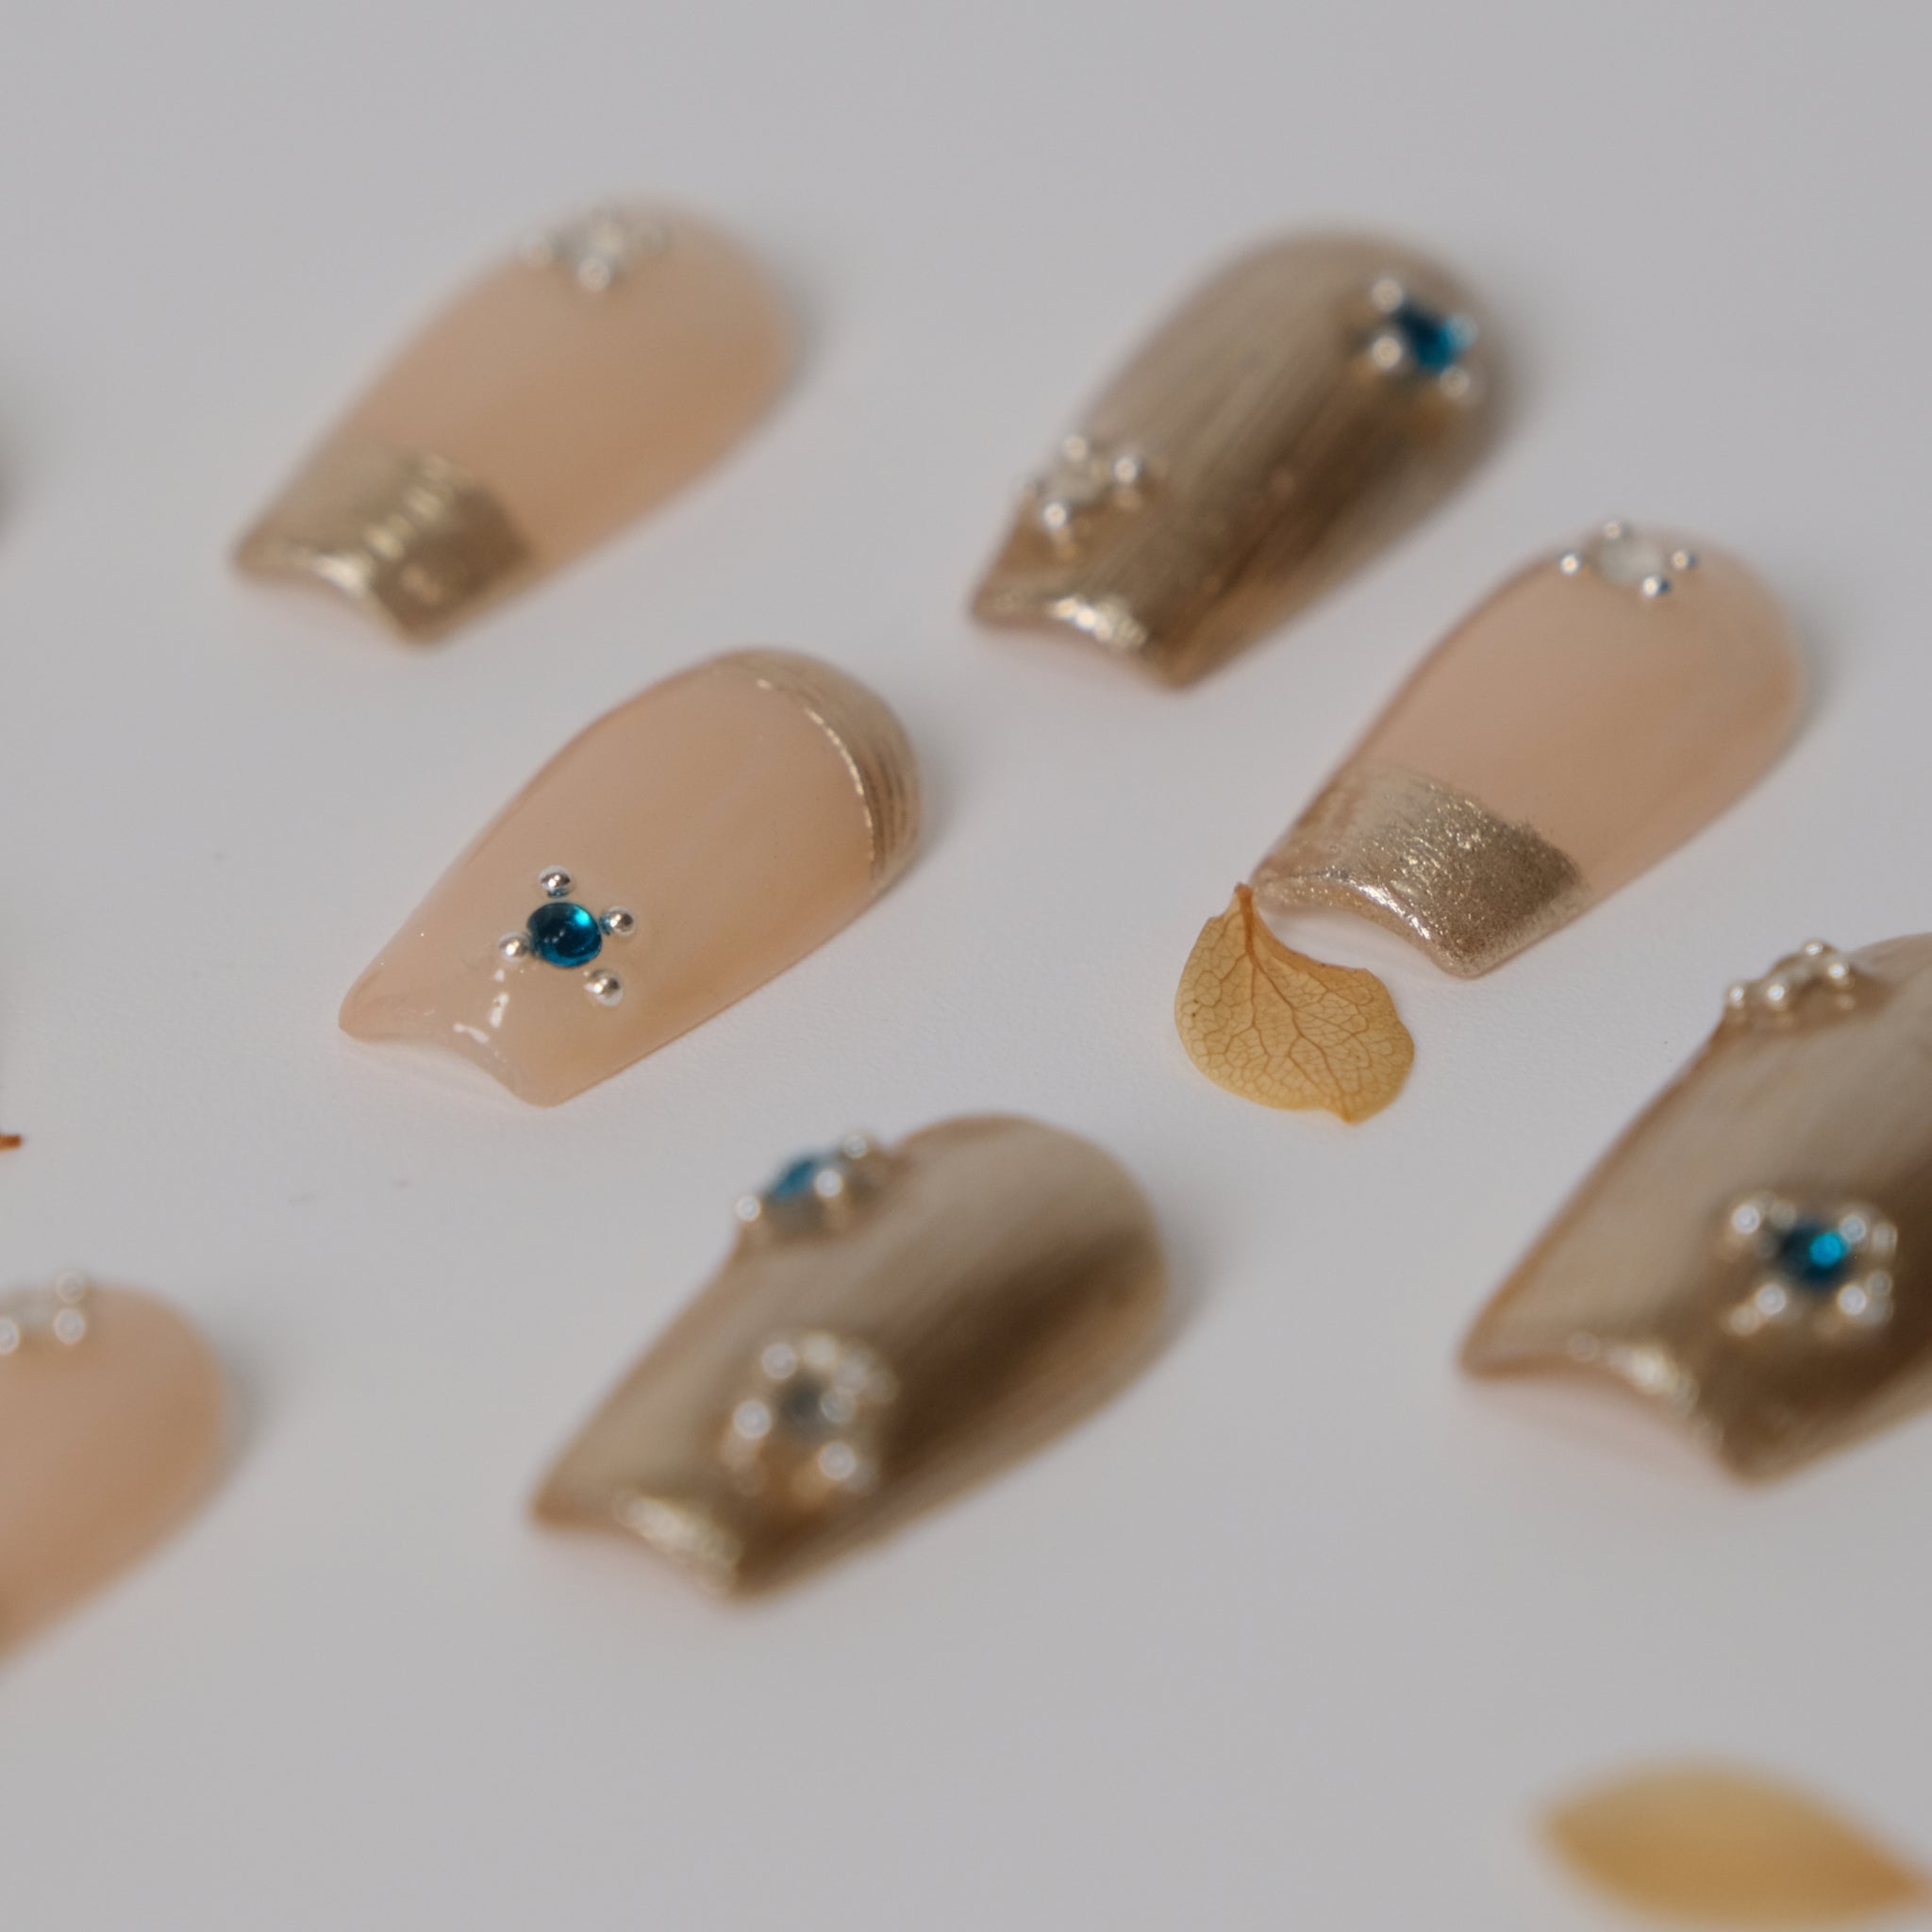 Ancient Queen Press on Nail: Inspired by Exquisite Jewelry, These Gold French Nails Are a Masterpiece!